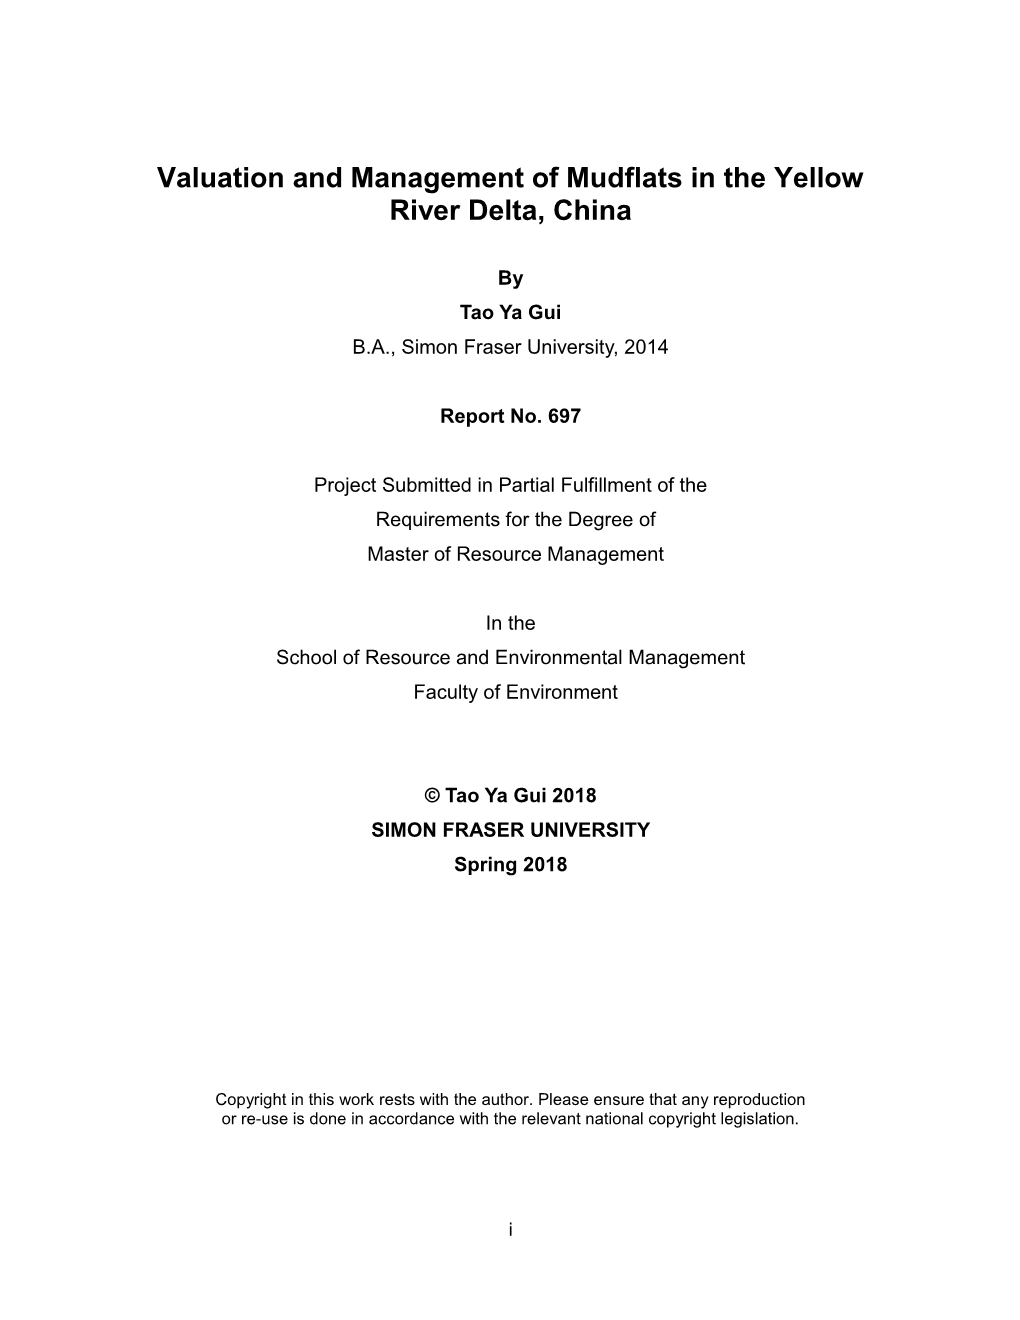 Valuation and Management of Mudflats in the Yellow River Delta, China